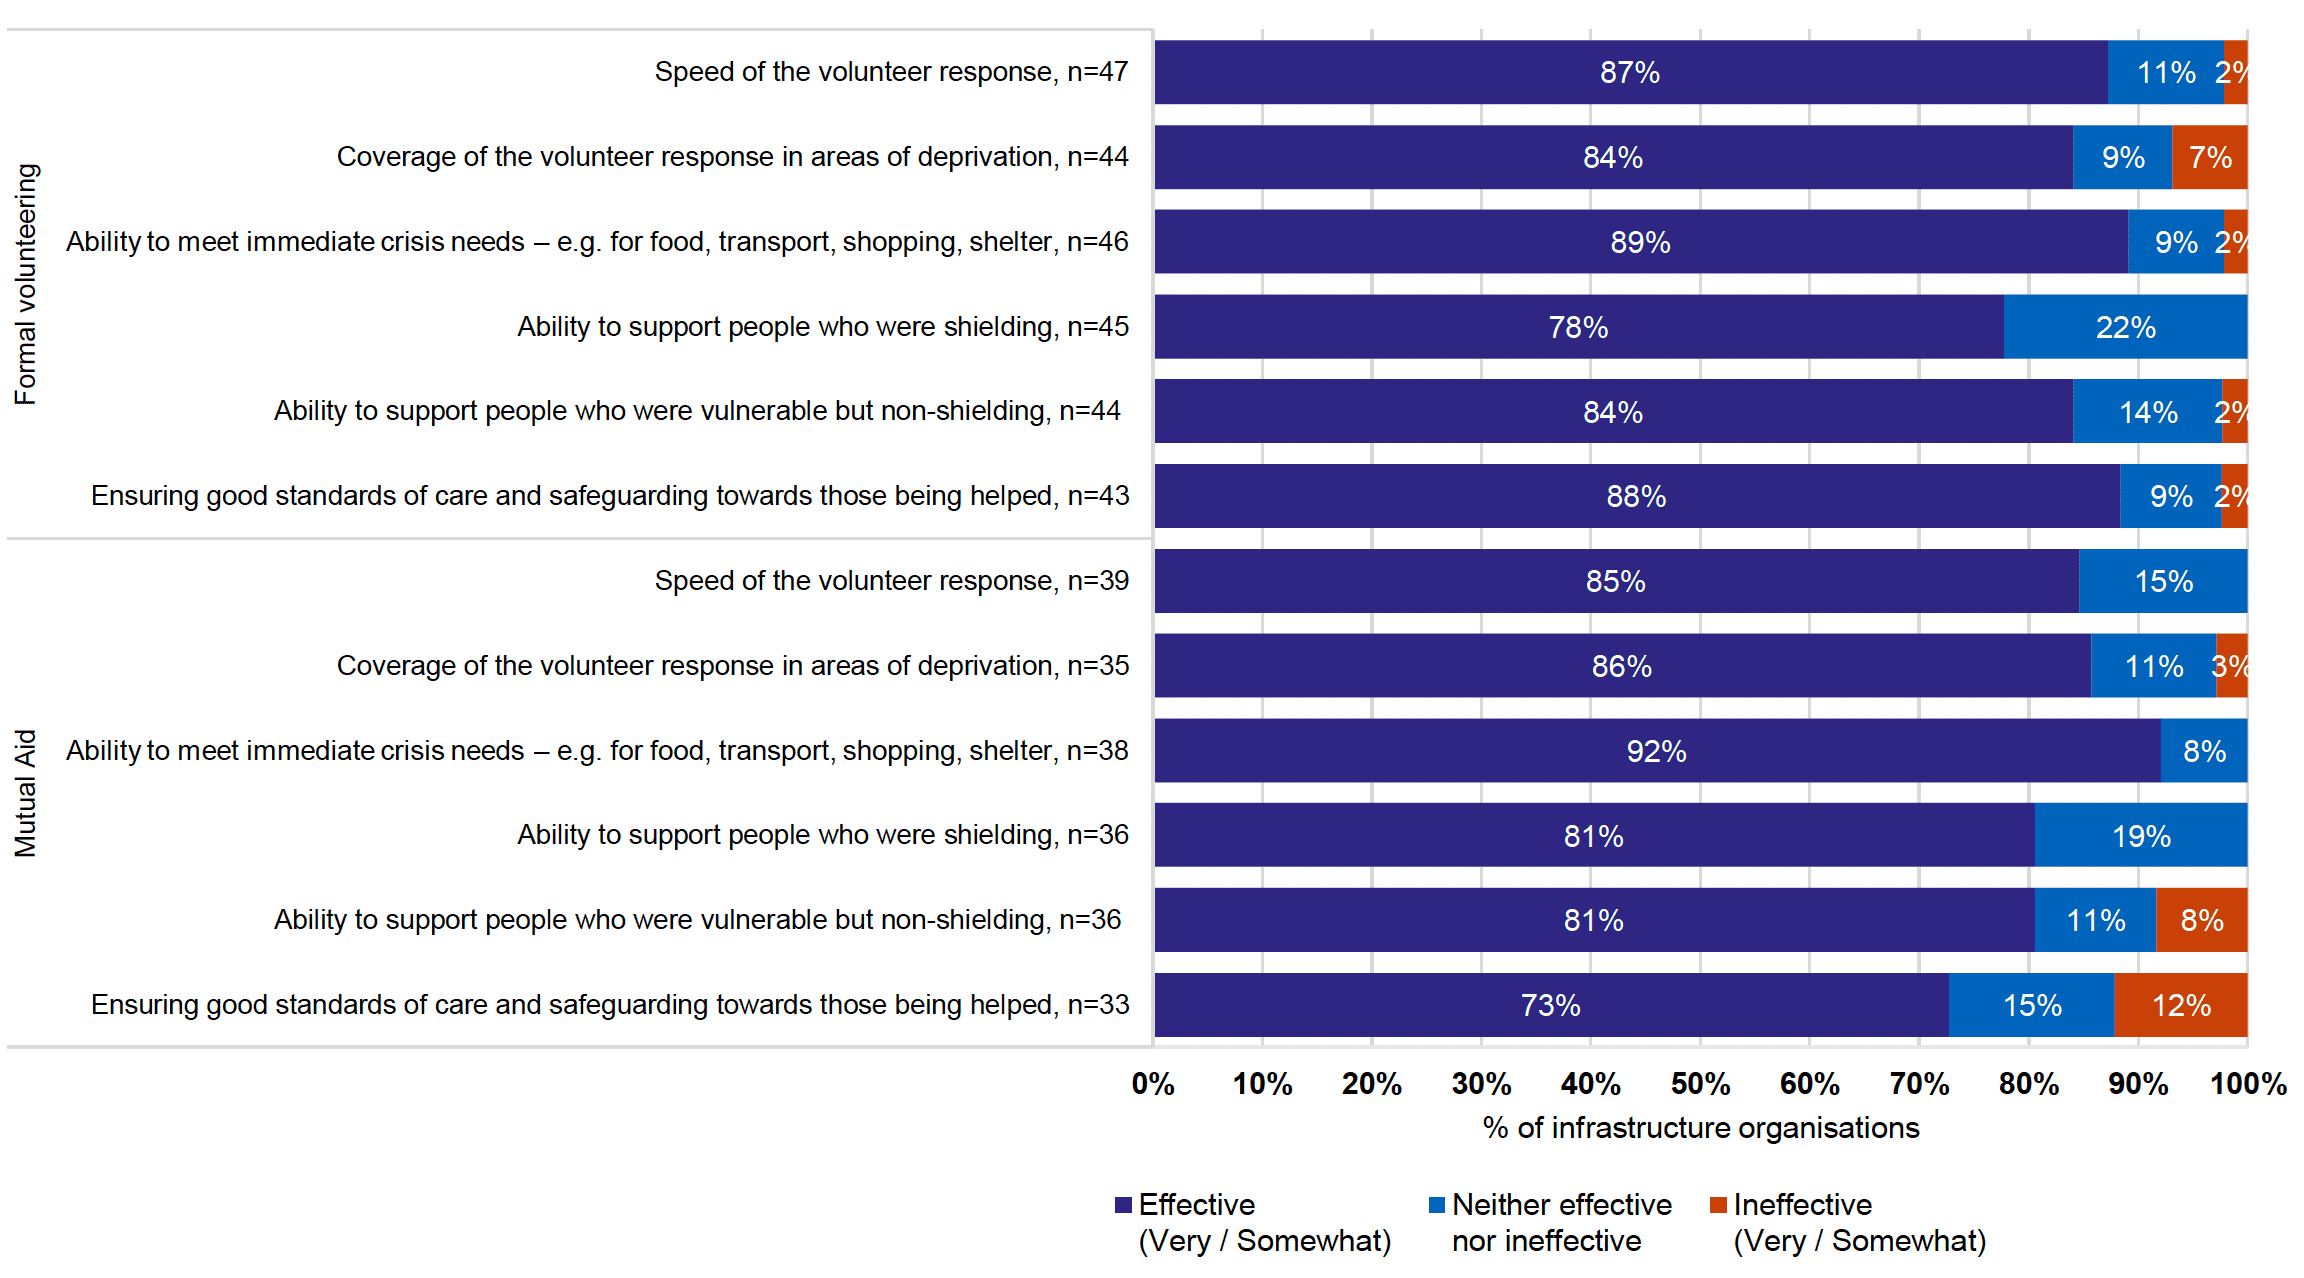 Chart showing infrastructure organisation views on the effectiveness of formal and mutual aid volunteering in the second lockdown (Dec 2020-Apr 2021), excluding ‘don’t know’ responses